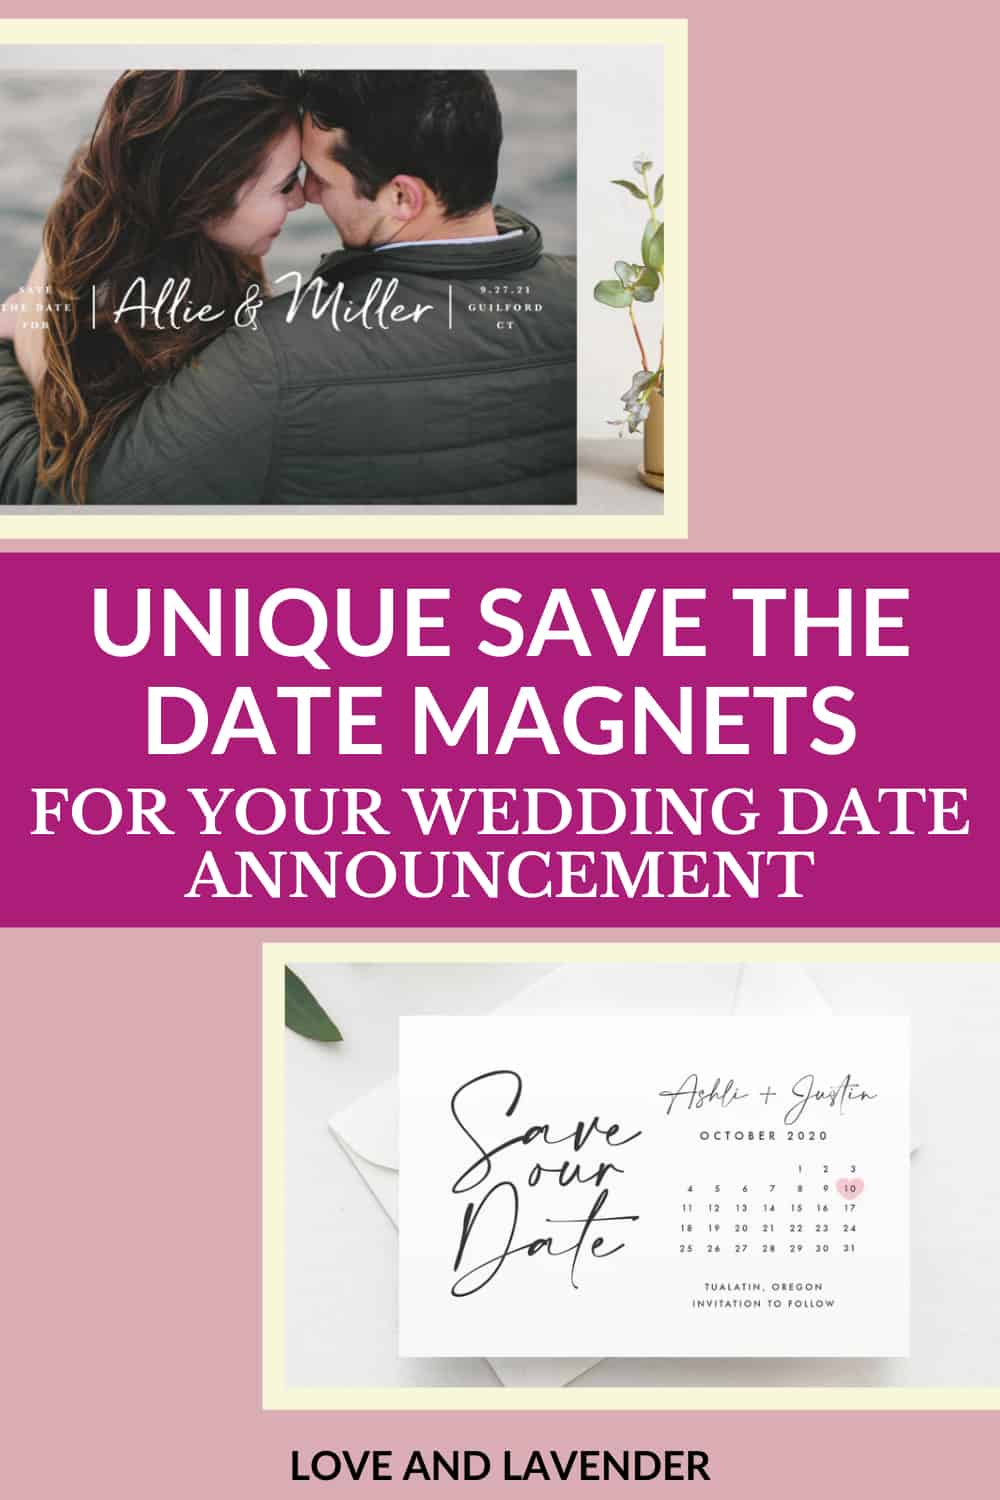 Pinterest pin - Save the Date Magnets